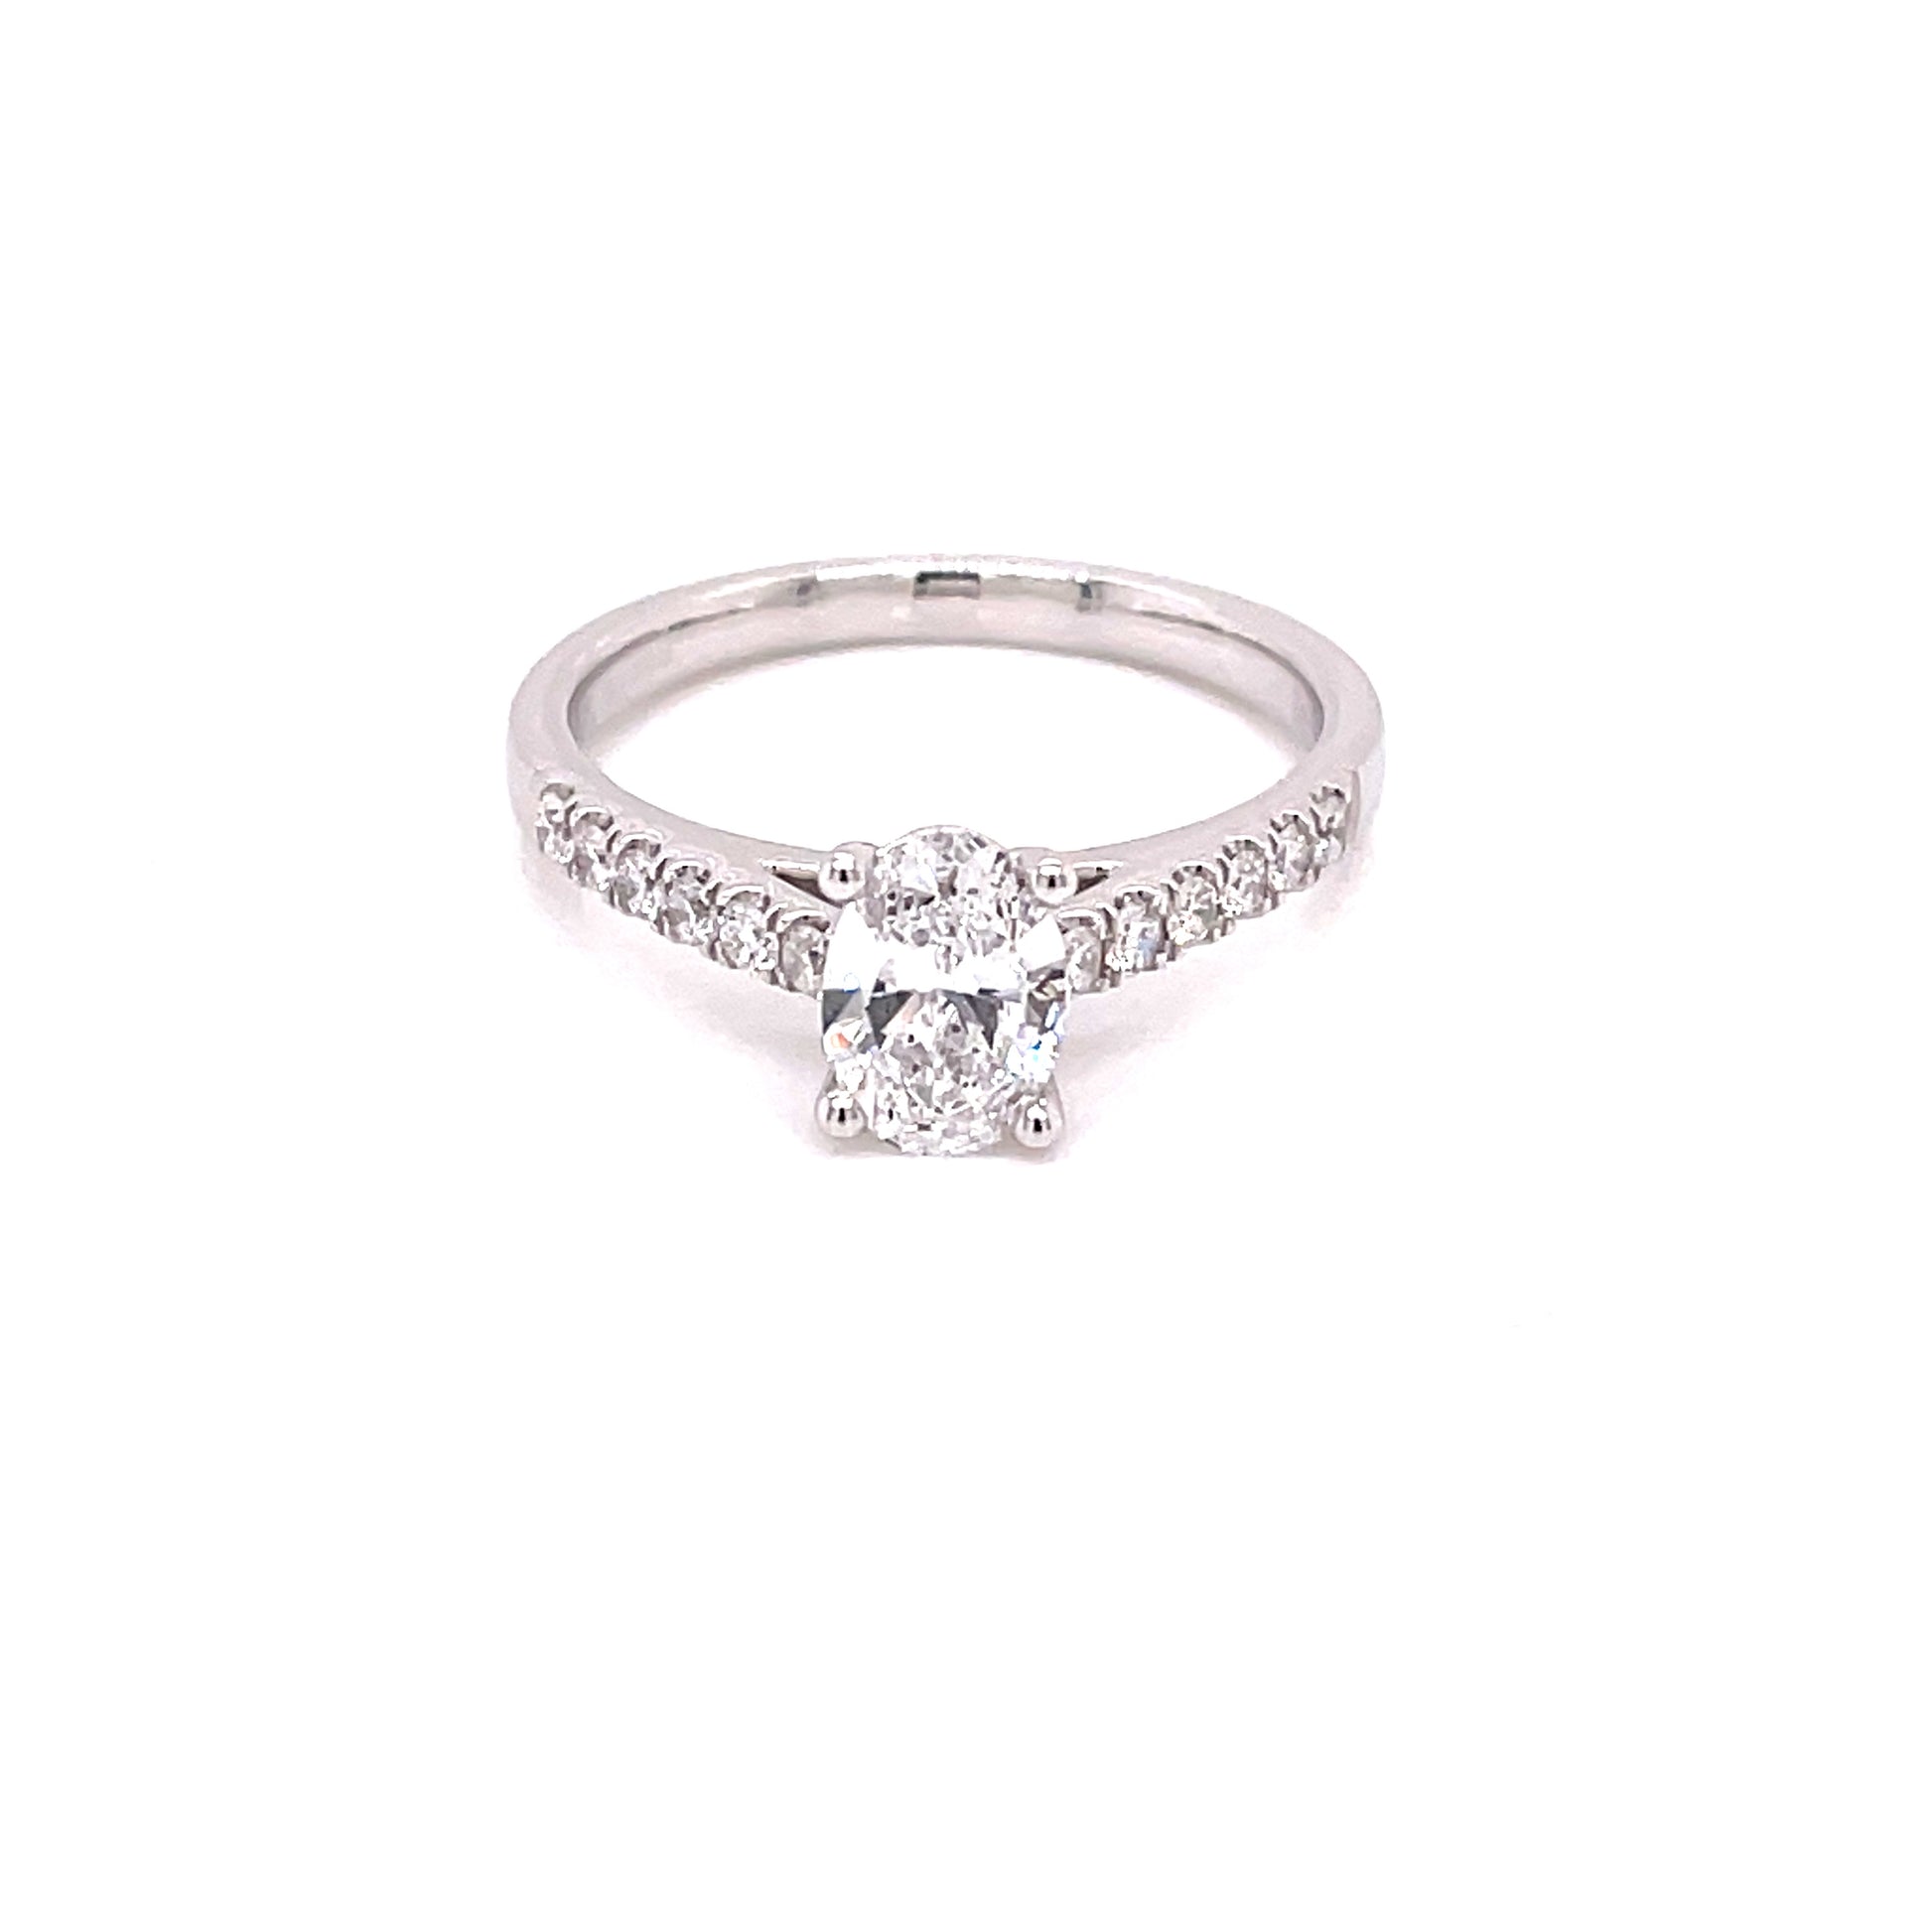 Oval Shaped Diamond Solitaire with Diamond set Shoulders ring - 0.95cts  Gardiner Brothers   